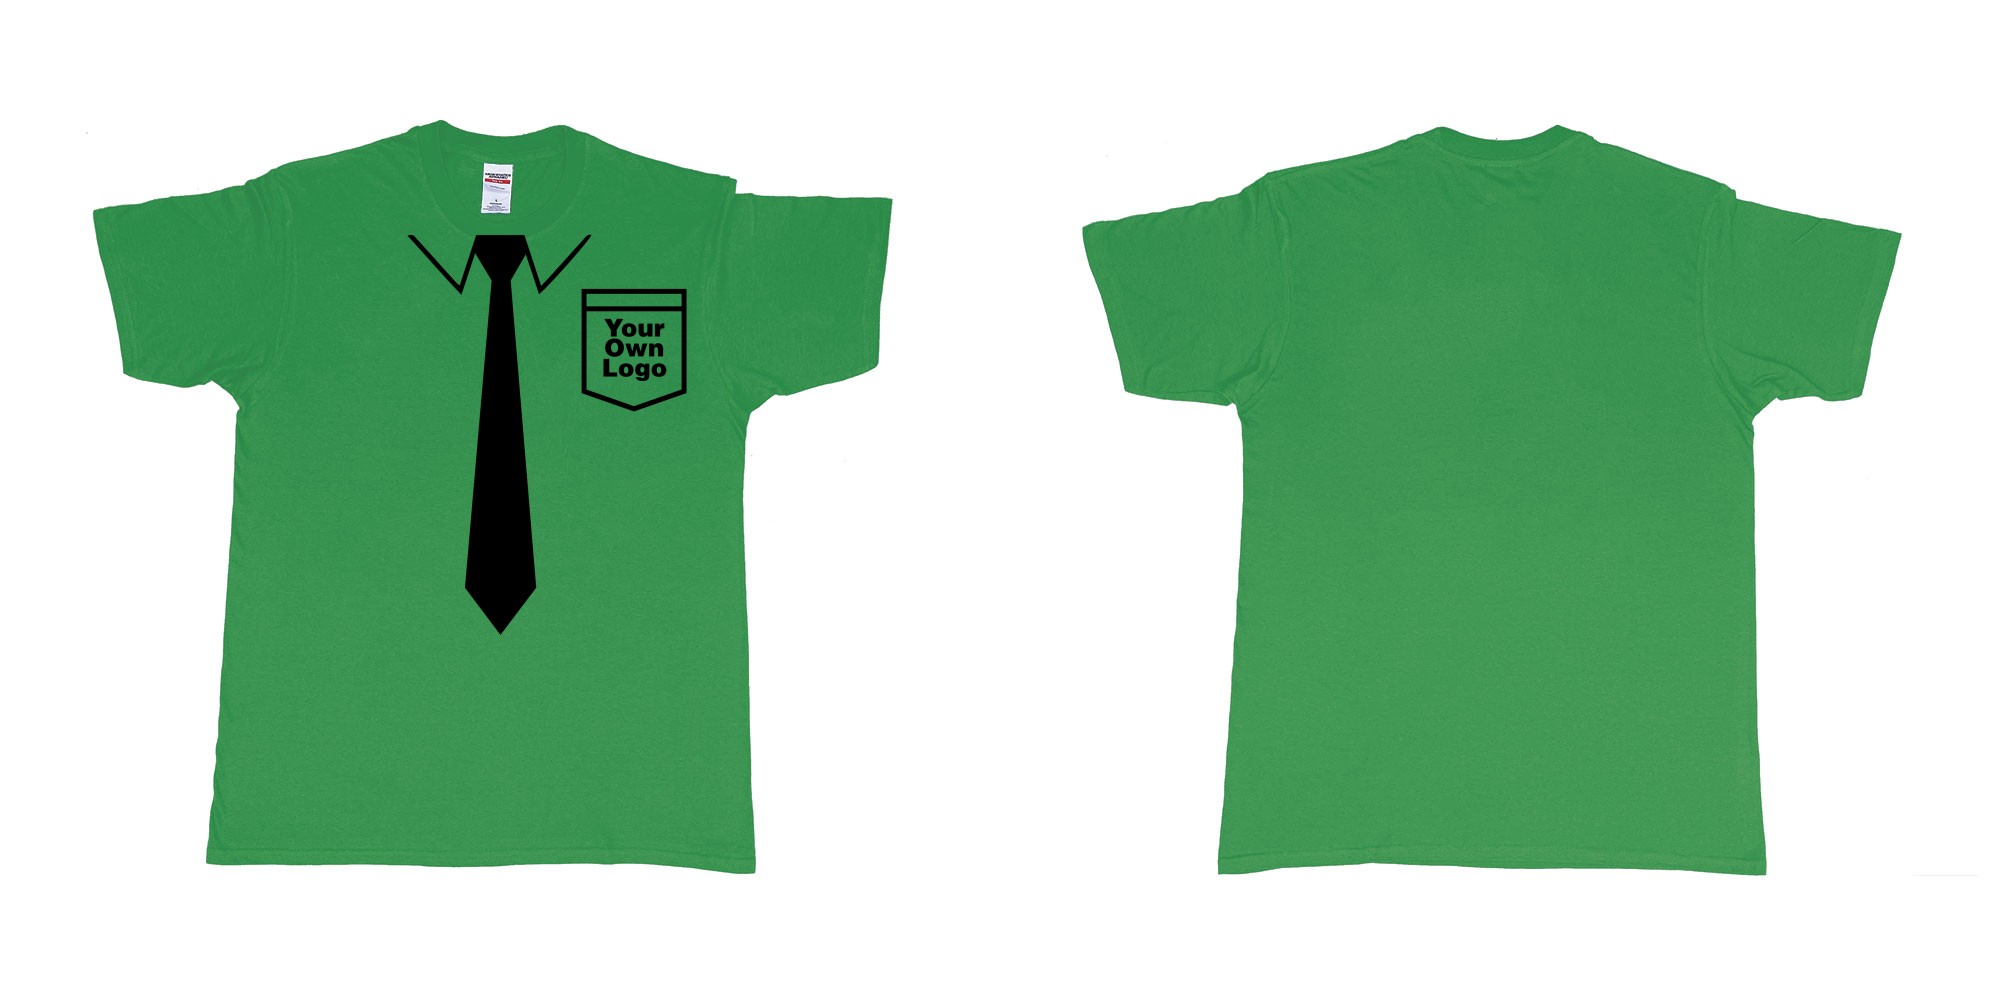 Custom tshirt design staff uniform with tie pocket own logo bali in fabric color irish-green choice your own text made in Bali by The Pirate Way